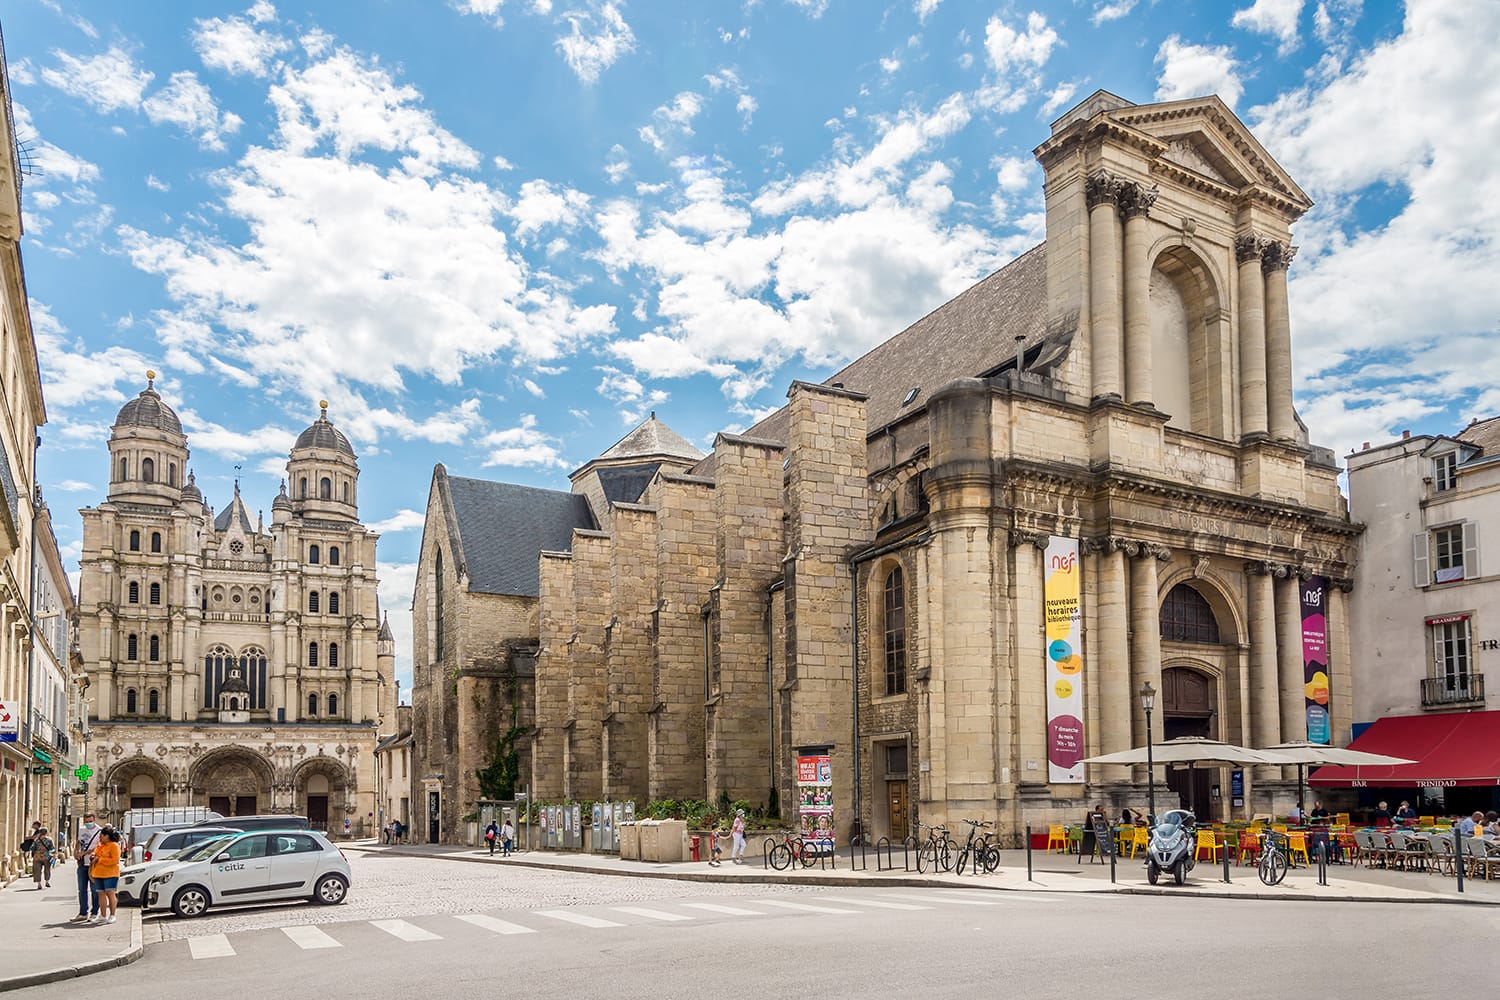 View at the Churches of St.Etienne and St.Michele in the streets of Dijon, France